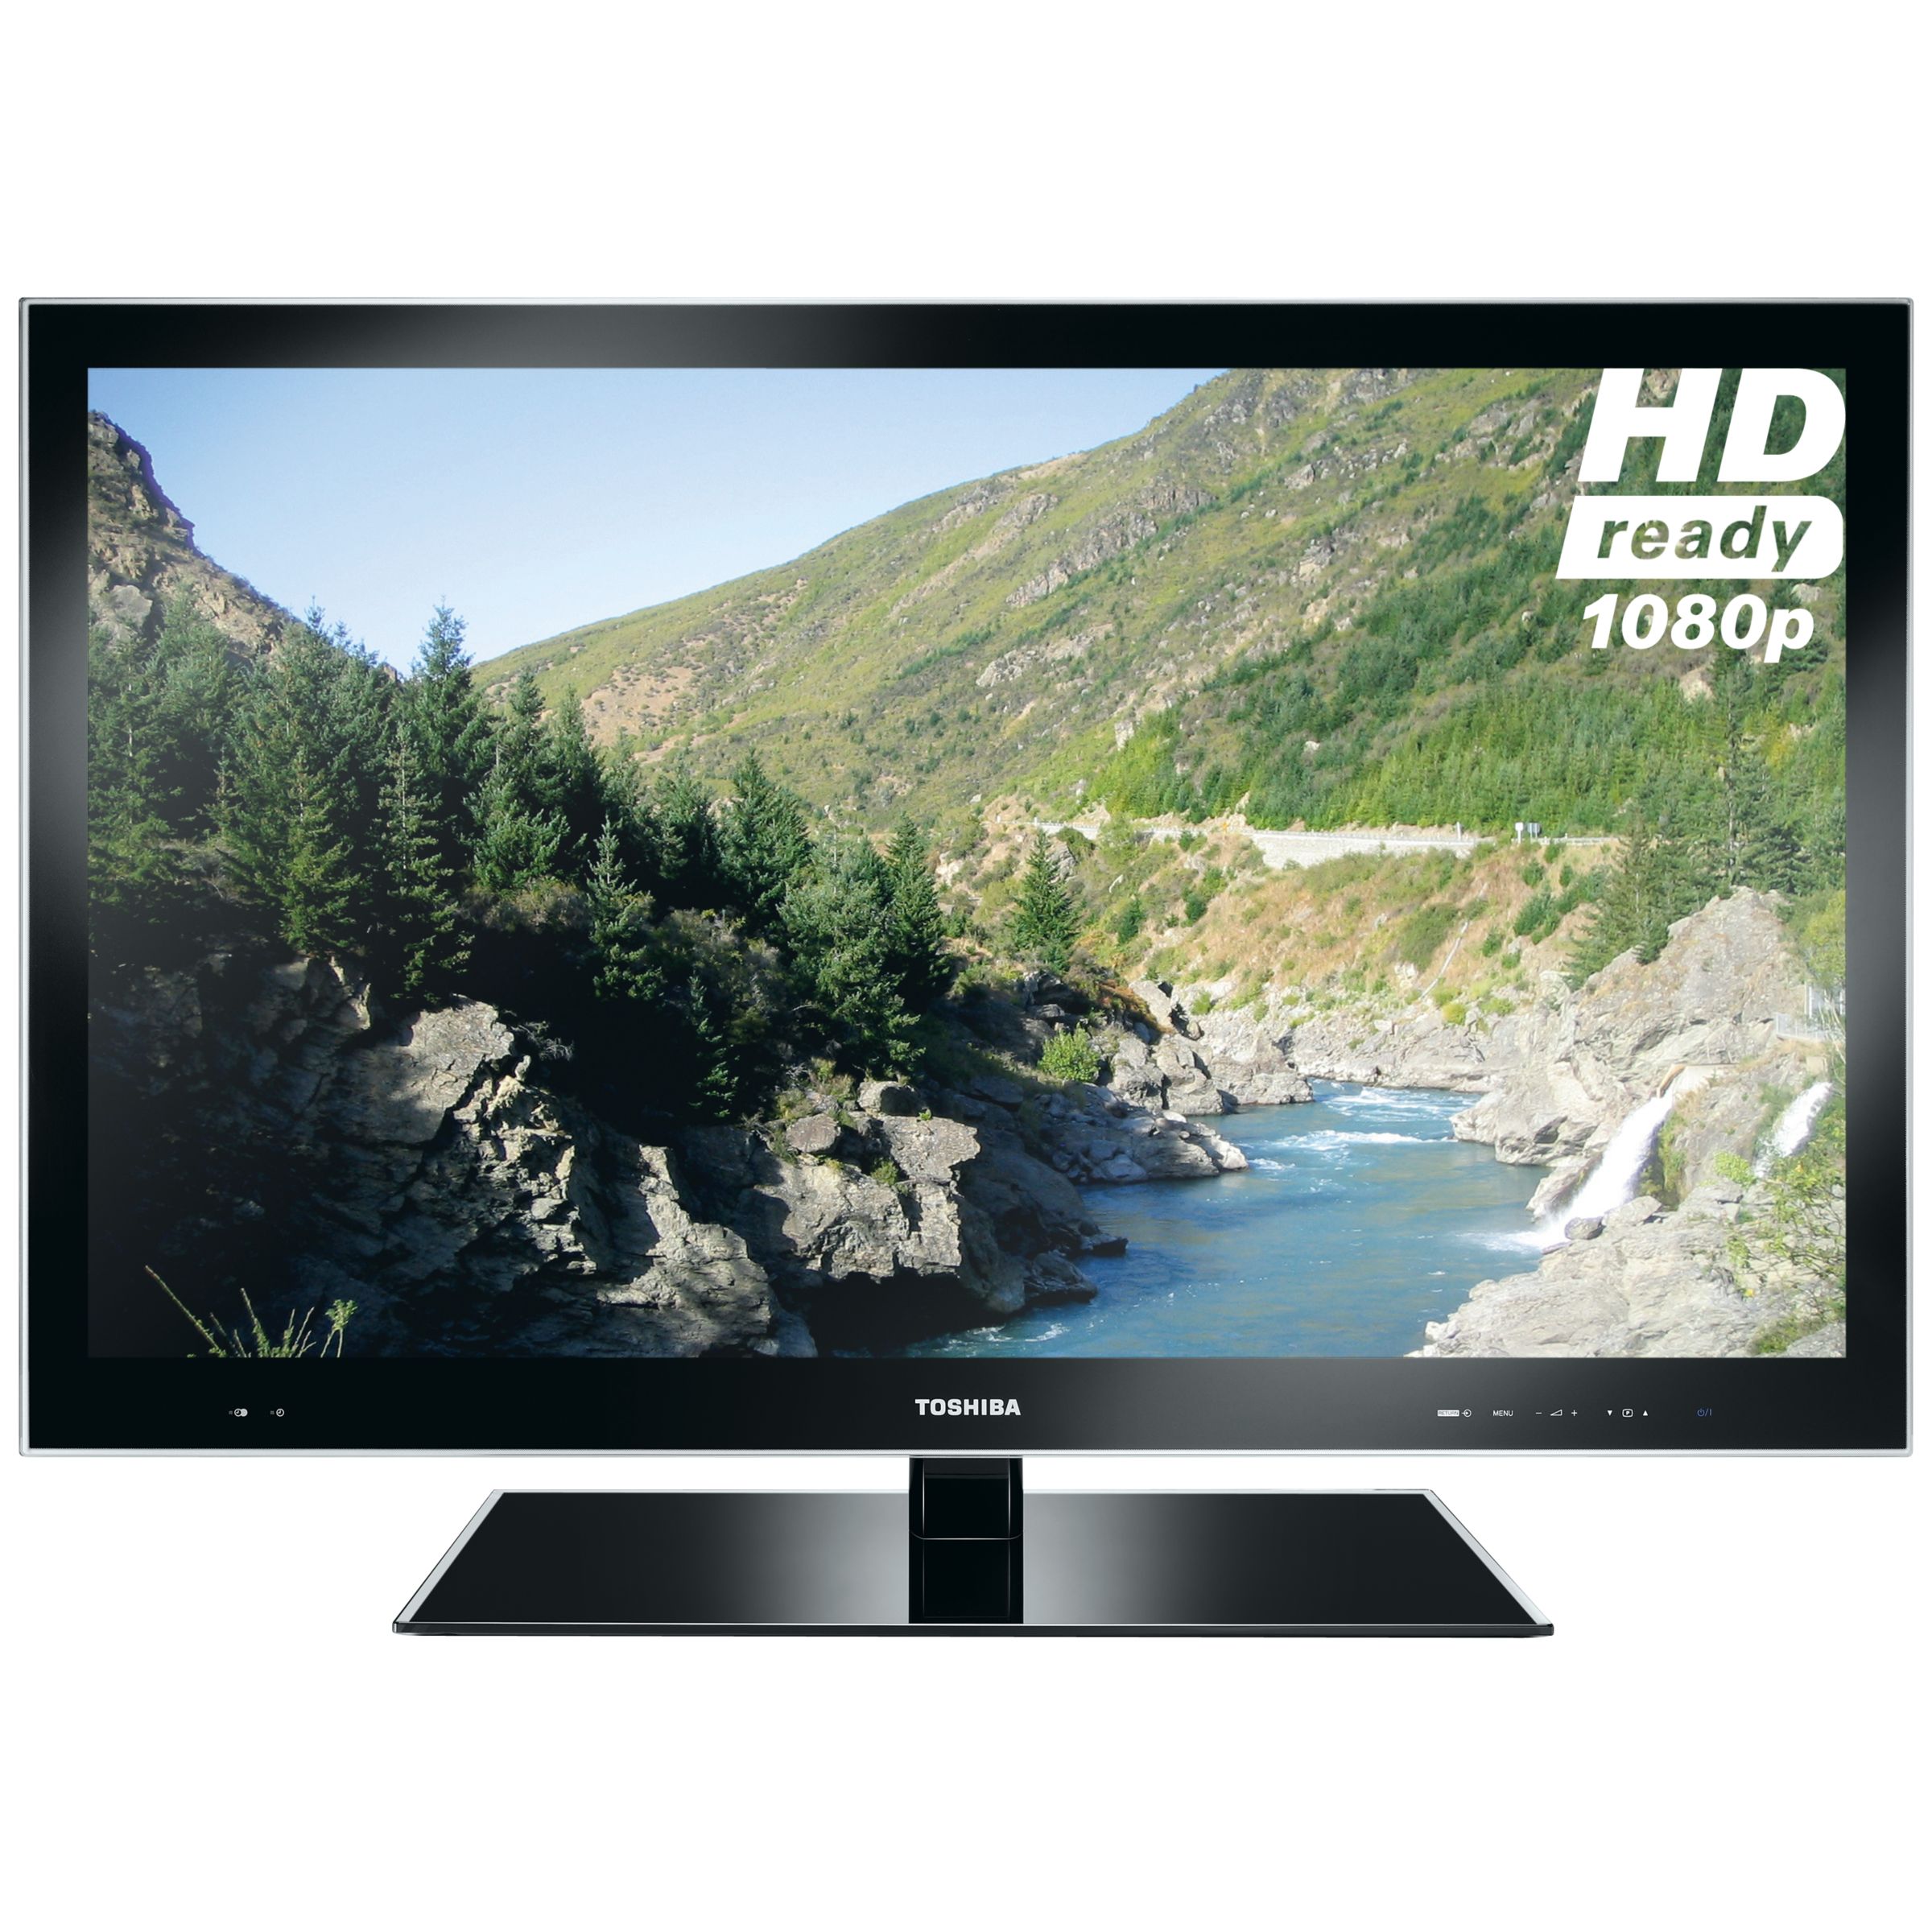 Toshiba Regza 46VL758 LED HD 1080p TV, 46", Freeview HD with FREE Blu-ray Player at John Lewis